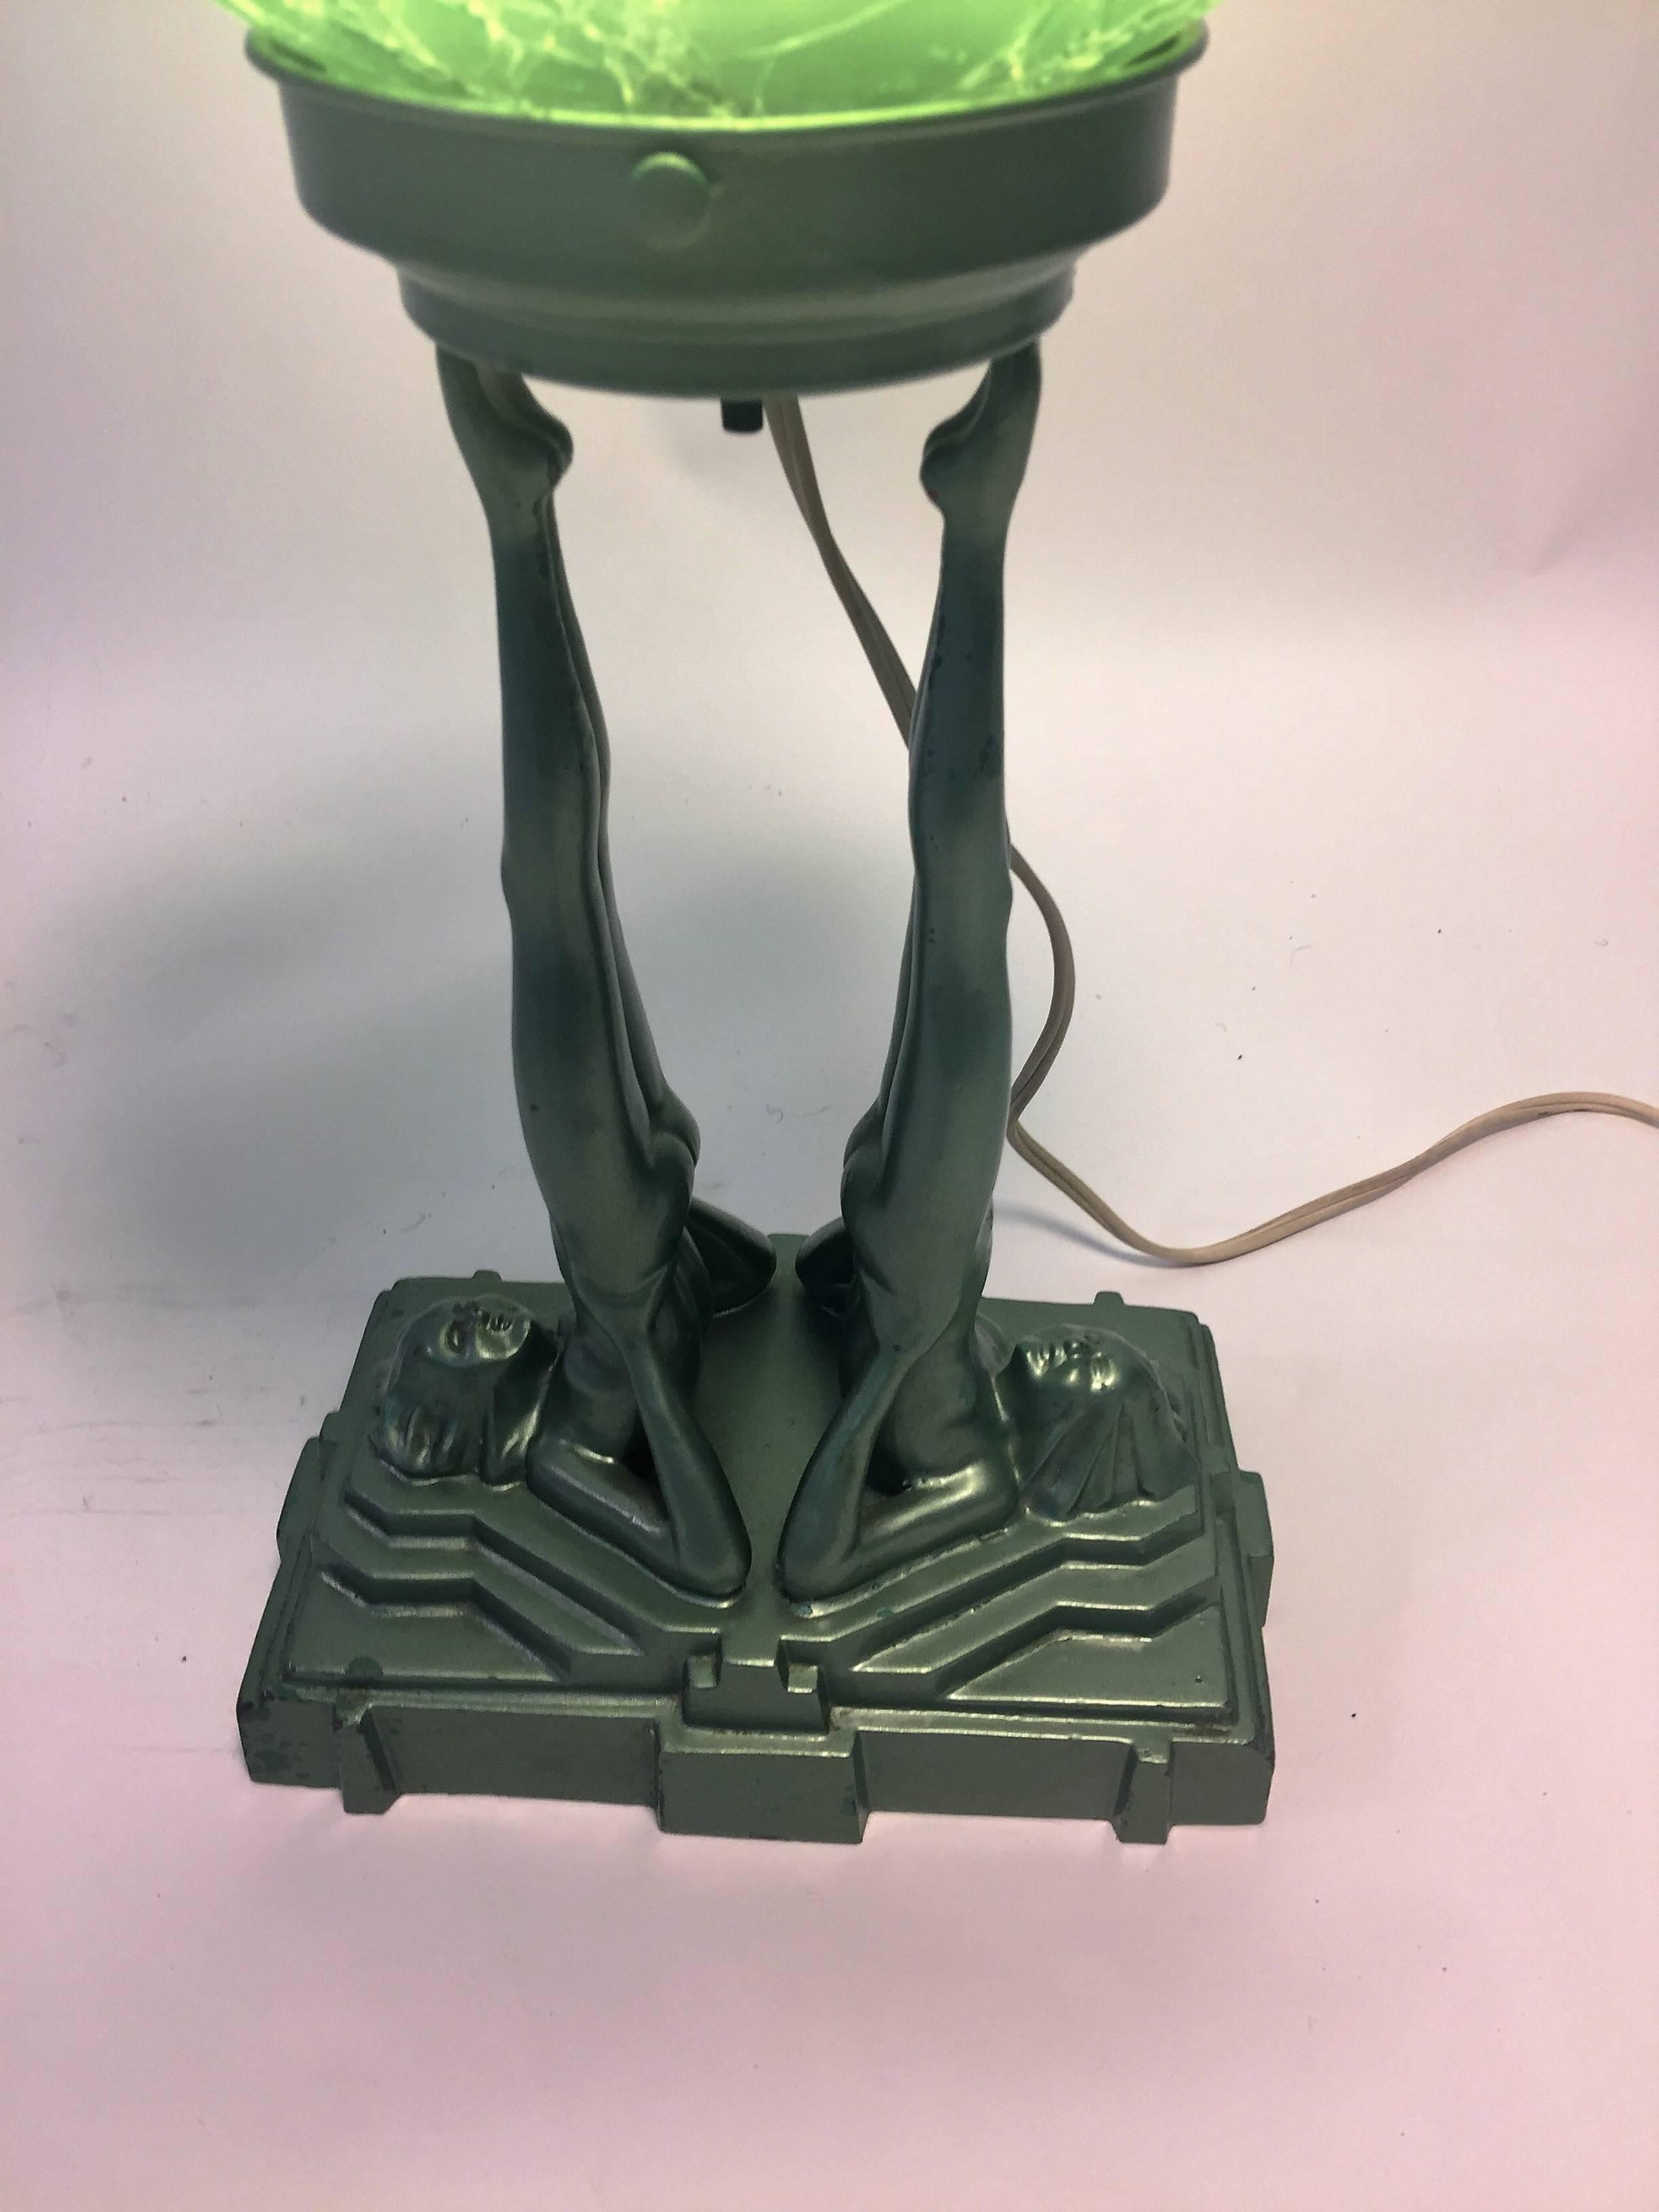 One of the rarer Frankart lamps made during the 1920s-1930s by Arthur von Frankenberg creator of these great sculptural white metal lamps finished with cold enameled finish. In all original condition with great green metallic enamel with gorgeous